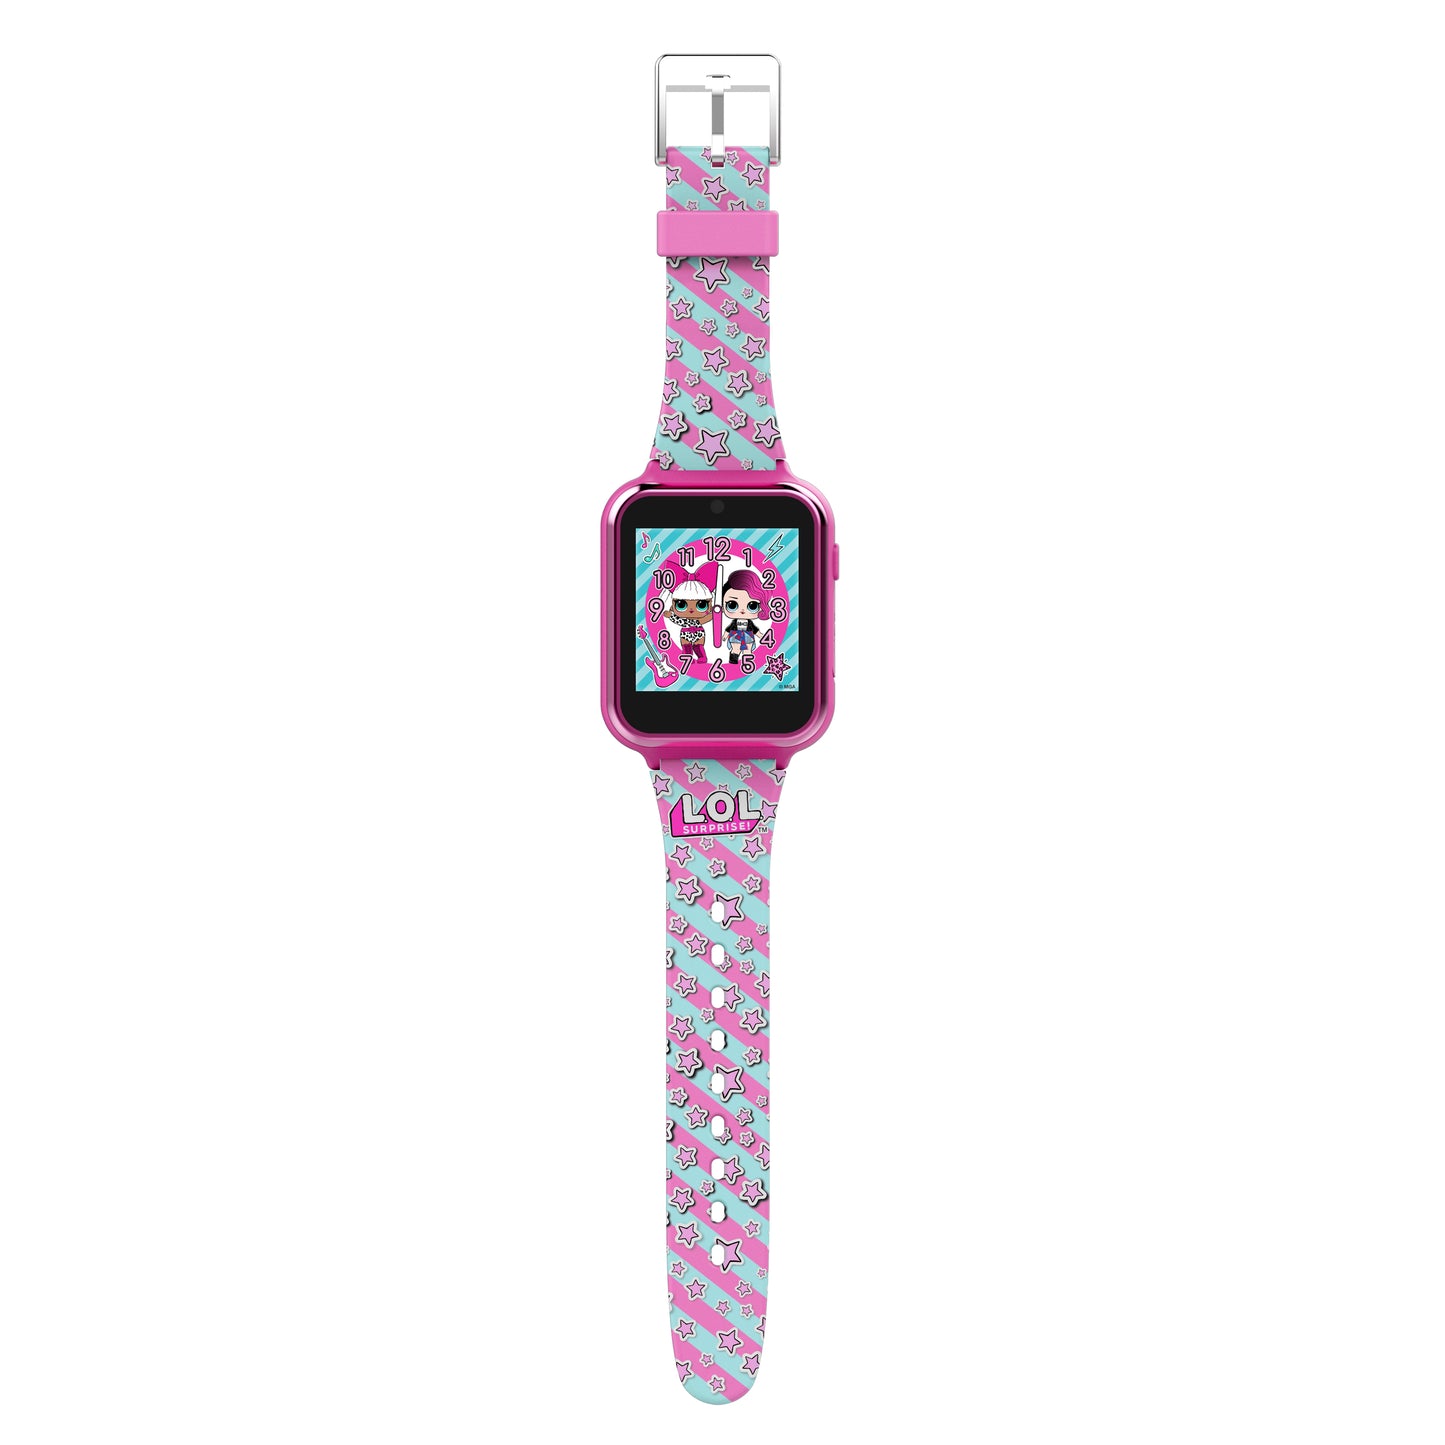 L.O.L. Surprise! Touch-Screen Smartwatch, Built in Selfie-Camera, Easy-to-Buckle Strap, Pink Smart Watch - Model: LOL4104